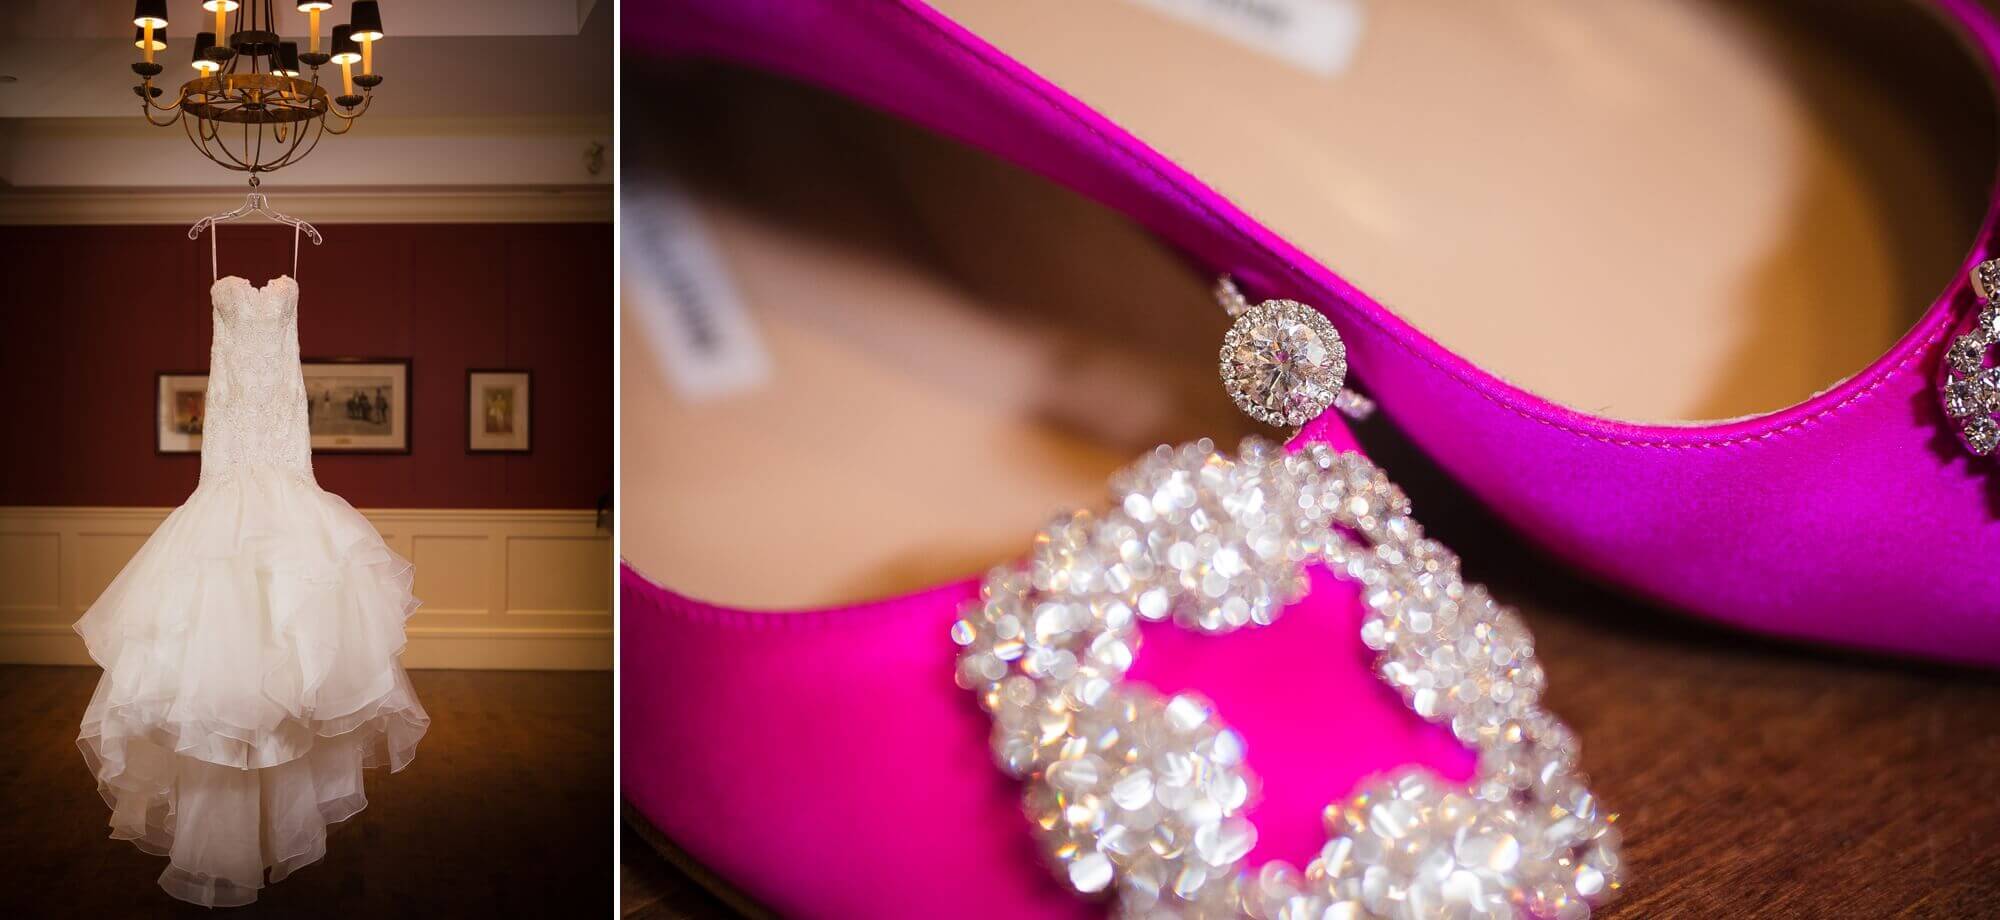 Details of the Bride's dress hanging from a chandelier and the ring with pink wedding shoes at Lambton G&CC in Toronto